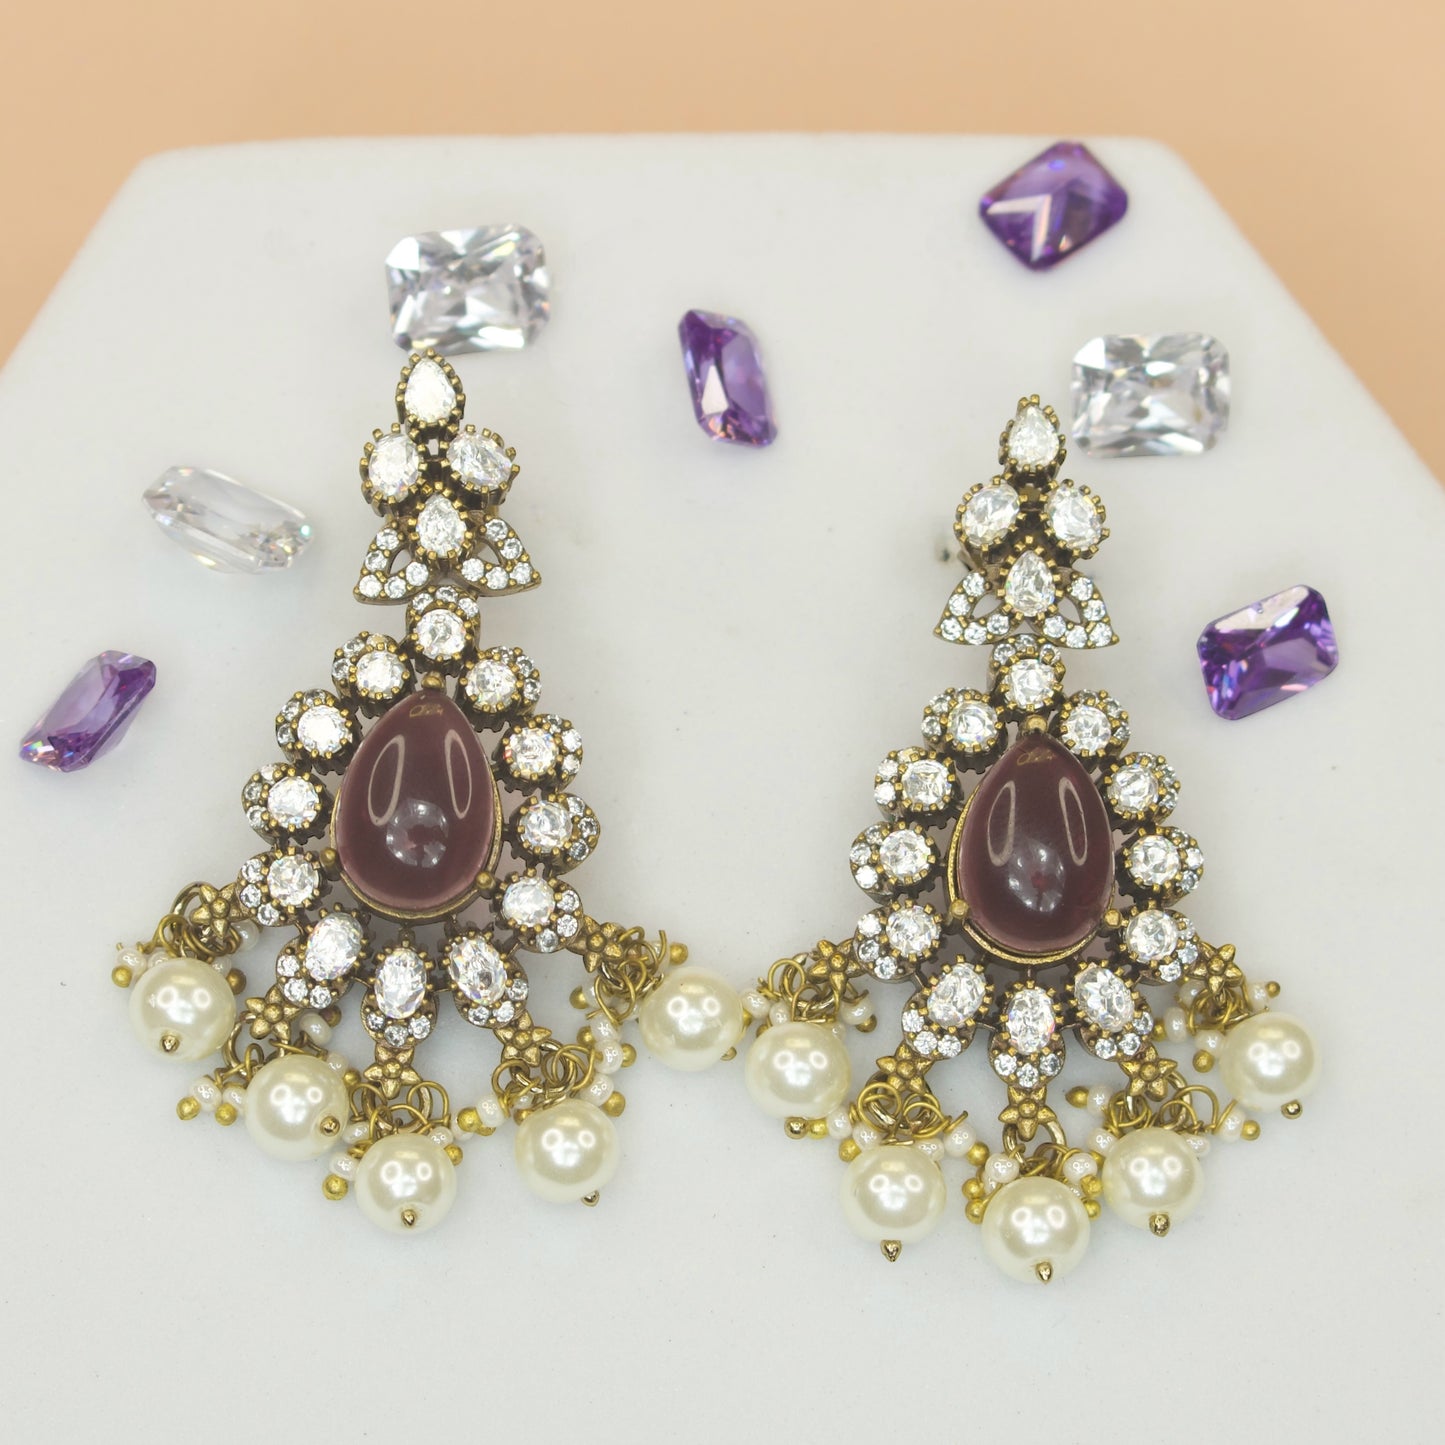 Traditional Victorian Moissanite Earrings with Fresh waster pearls